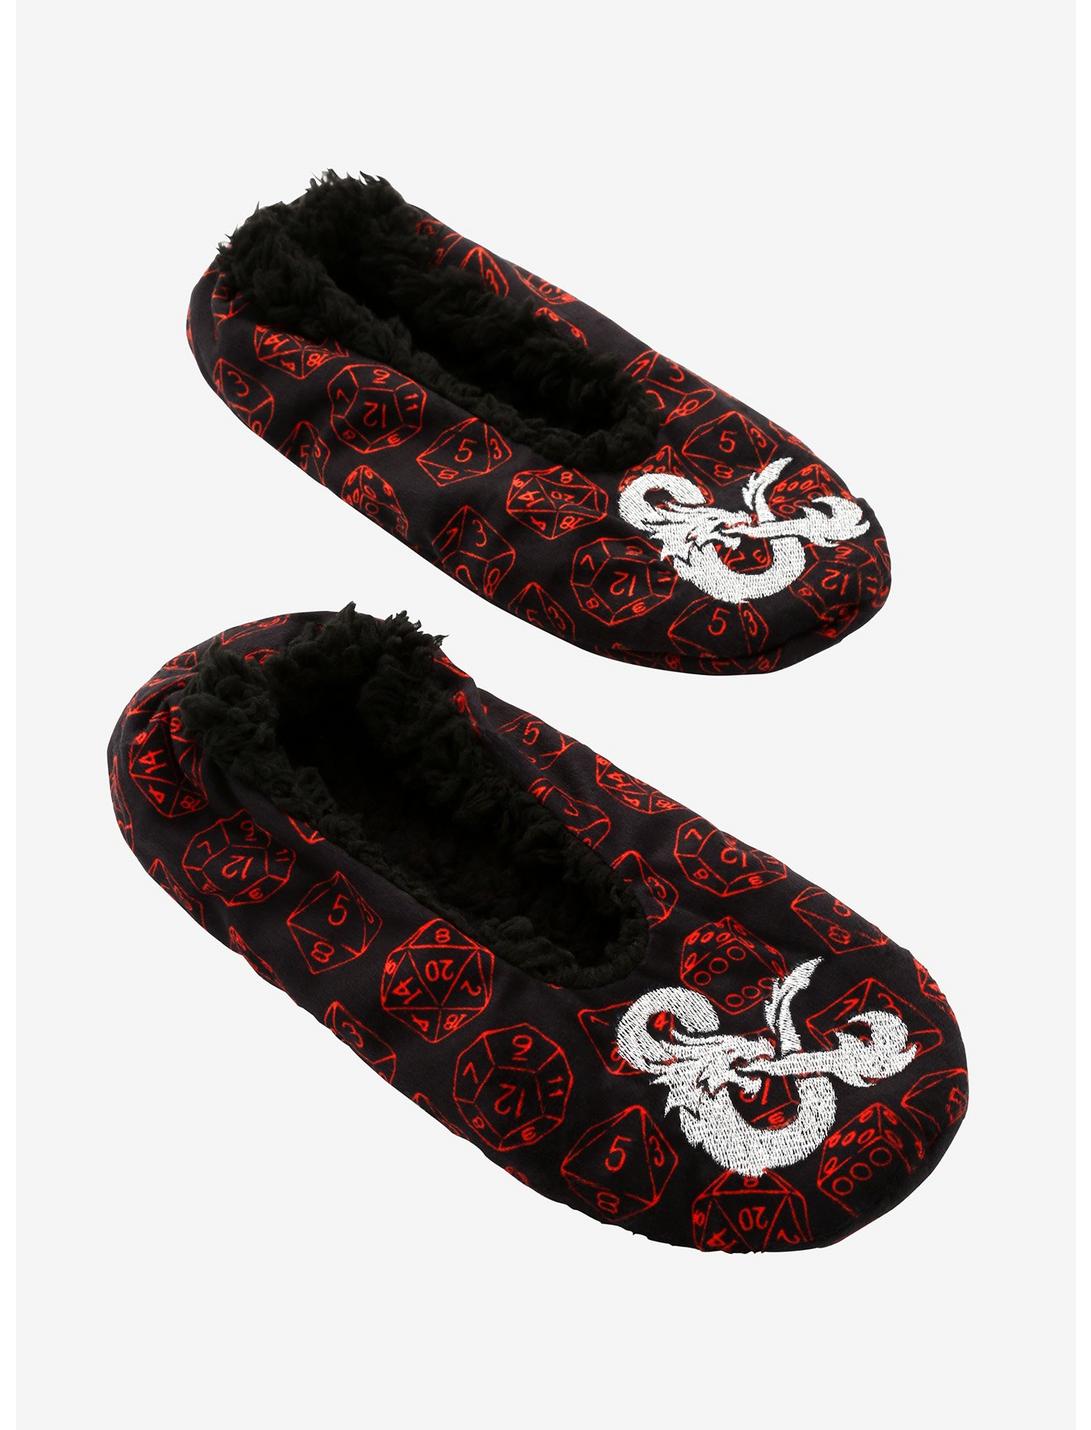 Dungeons & Dragons Dice Cozy Slippers, BLACK, hi-res